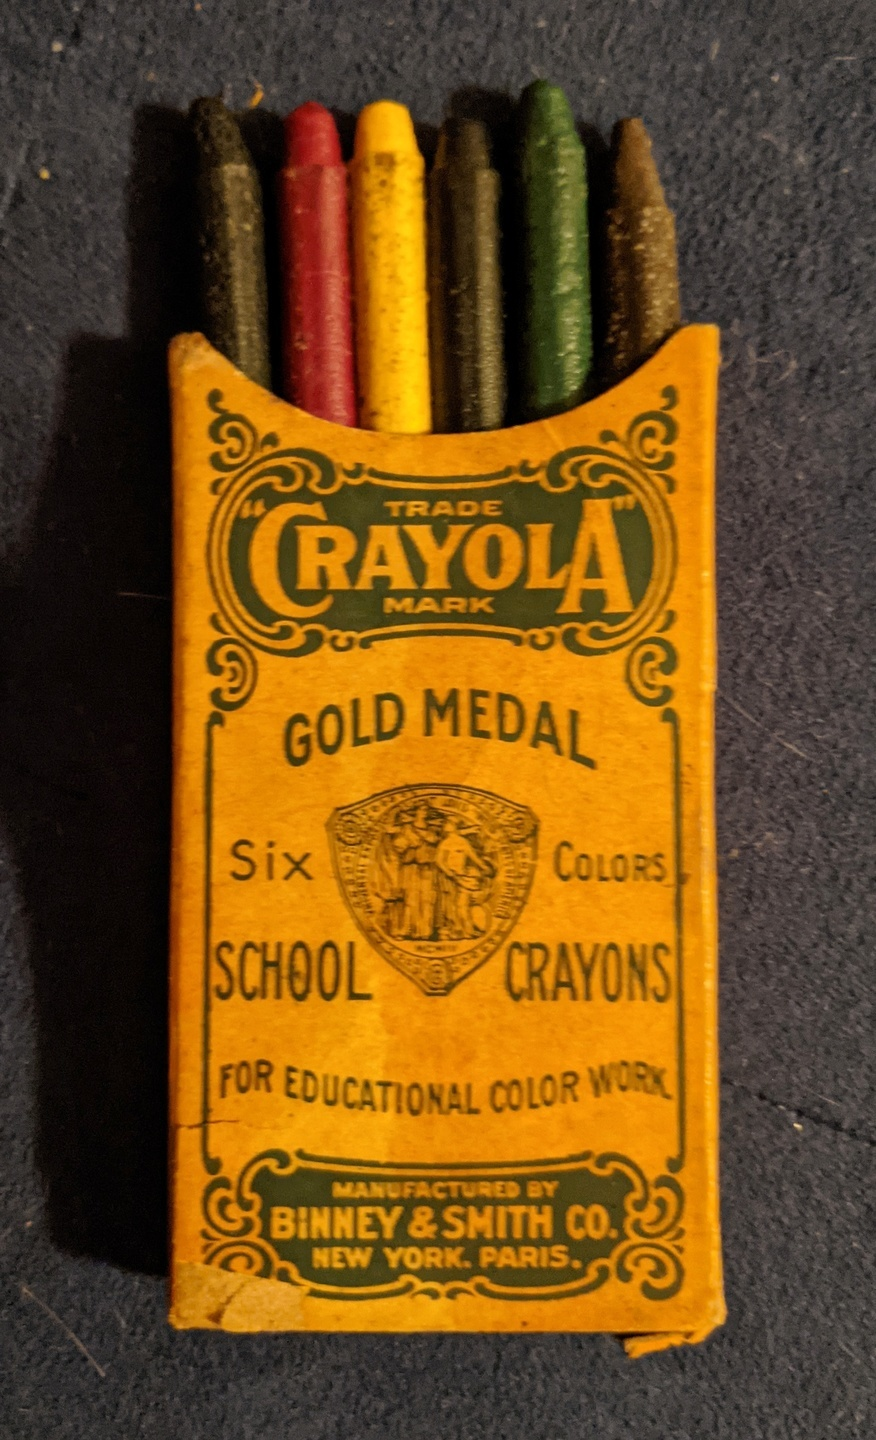 Vintage Crayola crayons box with six crayons, labeled for educational use